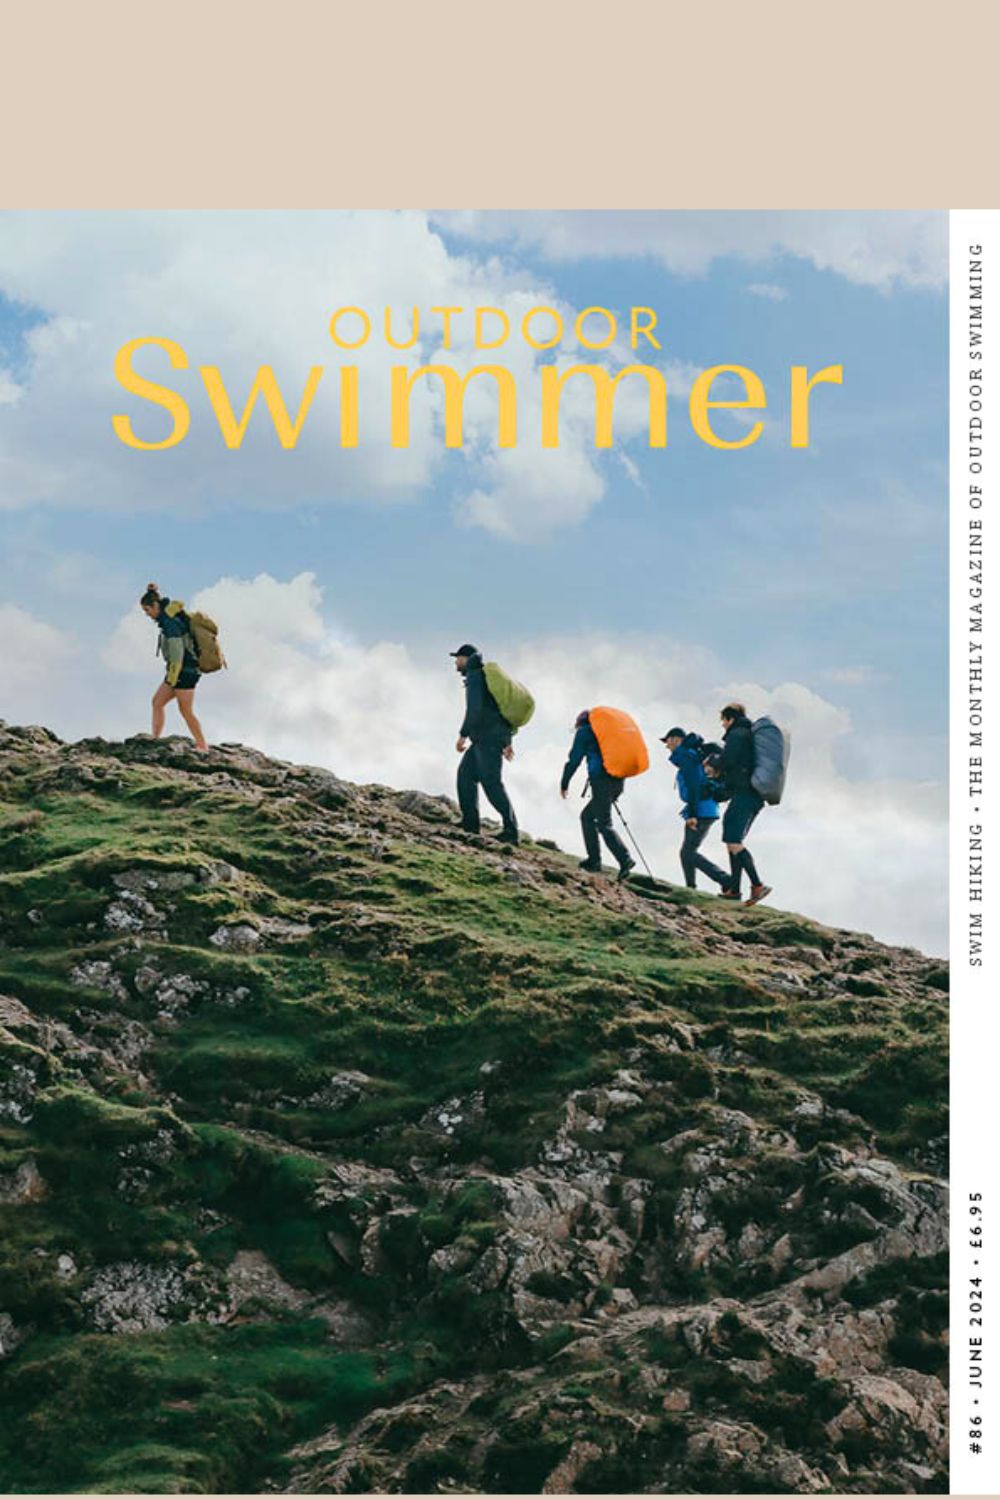 Outdoor Swimmer Issue 86 Swim hiking issue